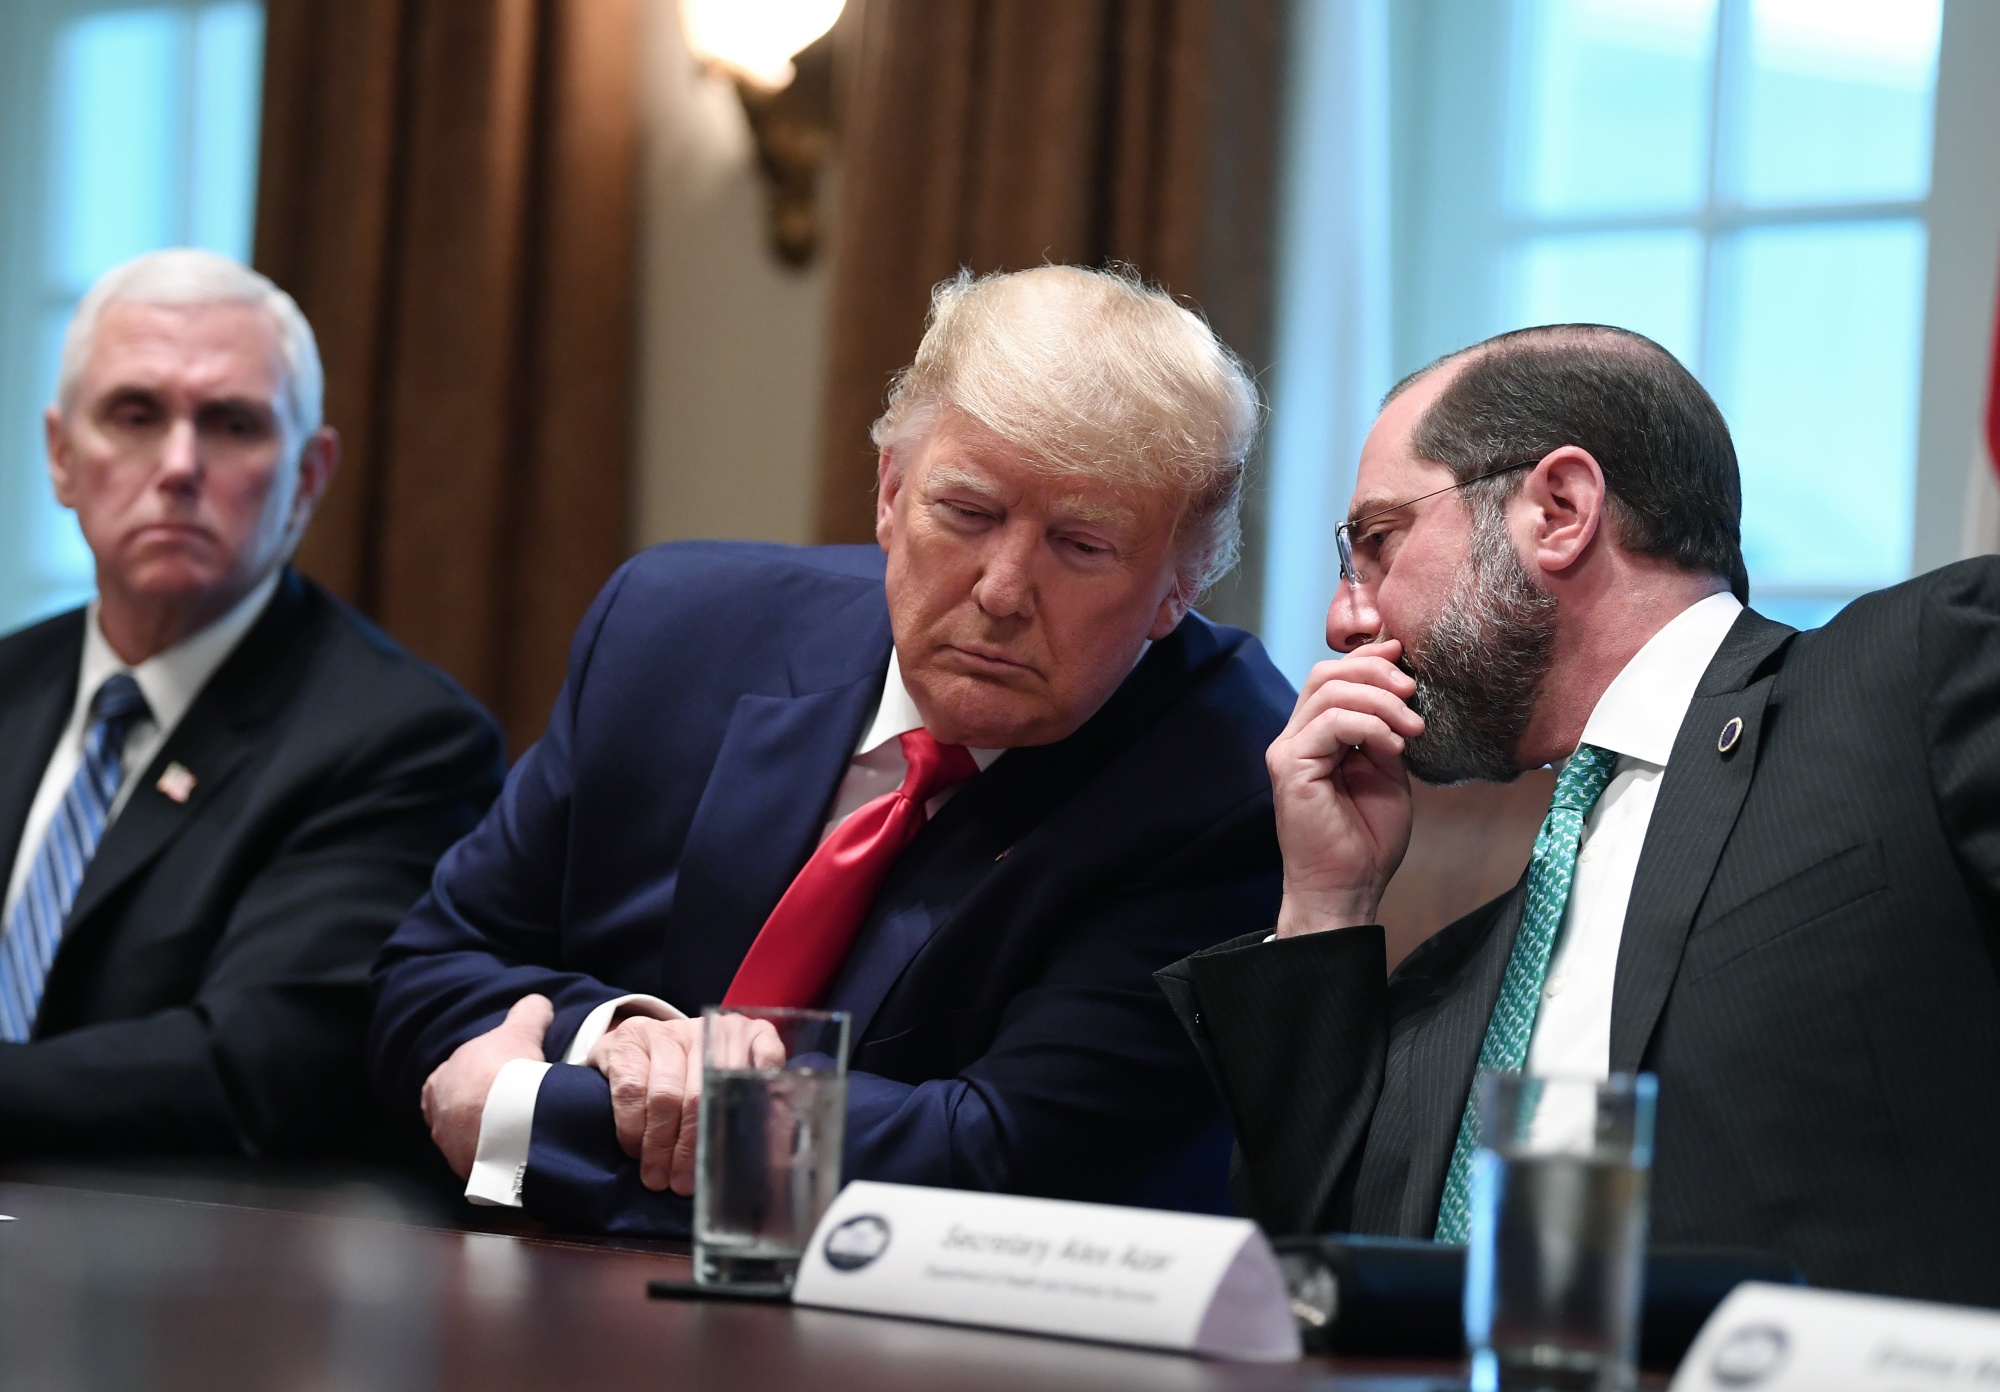 Alex Azar, secretary of Health and Human Services, speaks to Donald Trump during a meeting in Washington, D.C. on March 2.